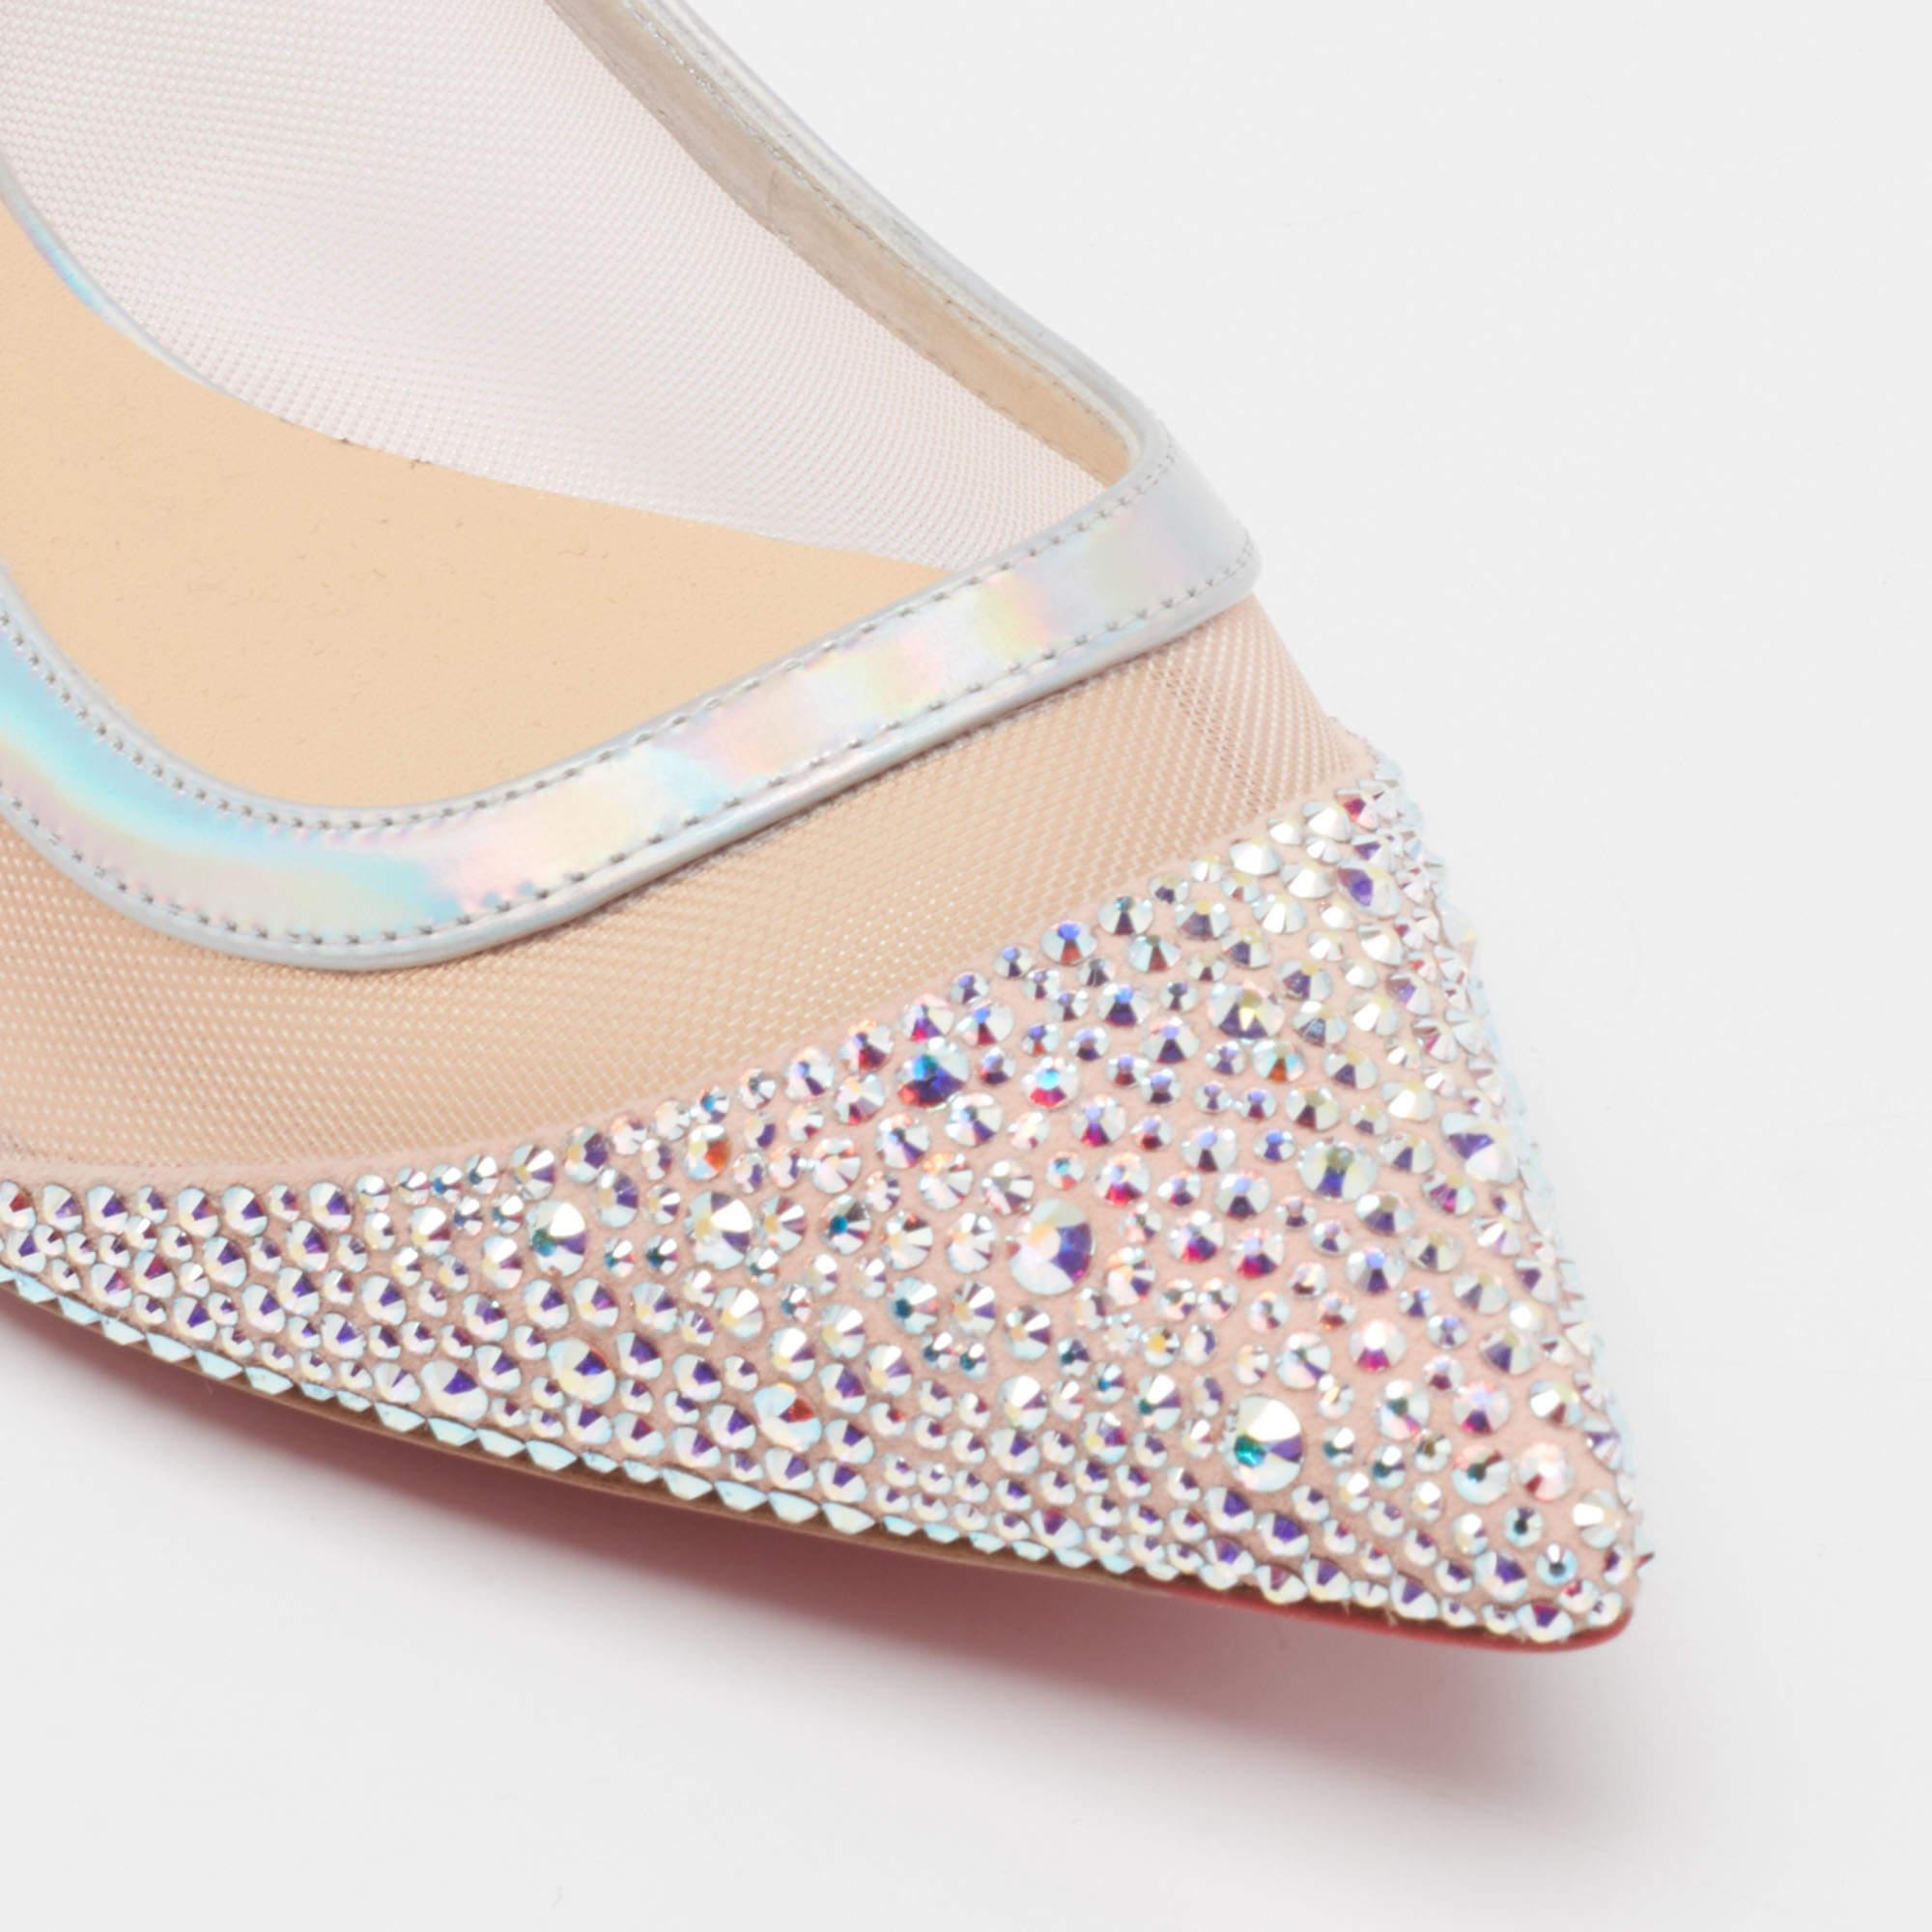 Christian Louboutin Mesh, Iridescent Leather and Suede Ballet Flats Size 35.5 For Sale 2